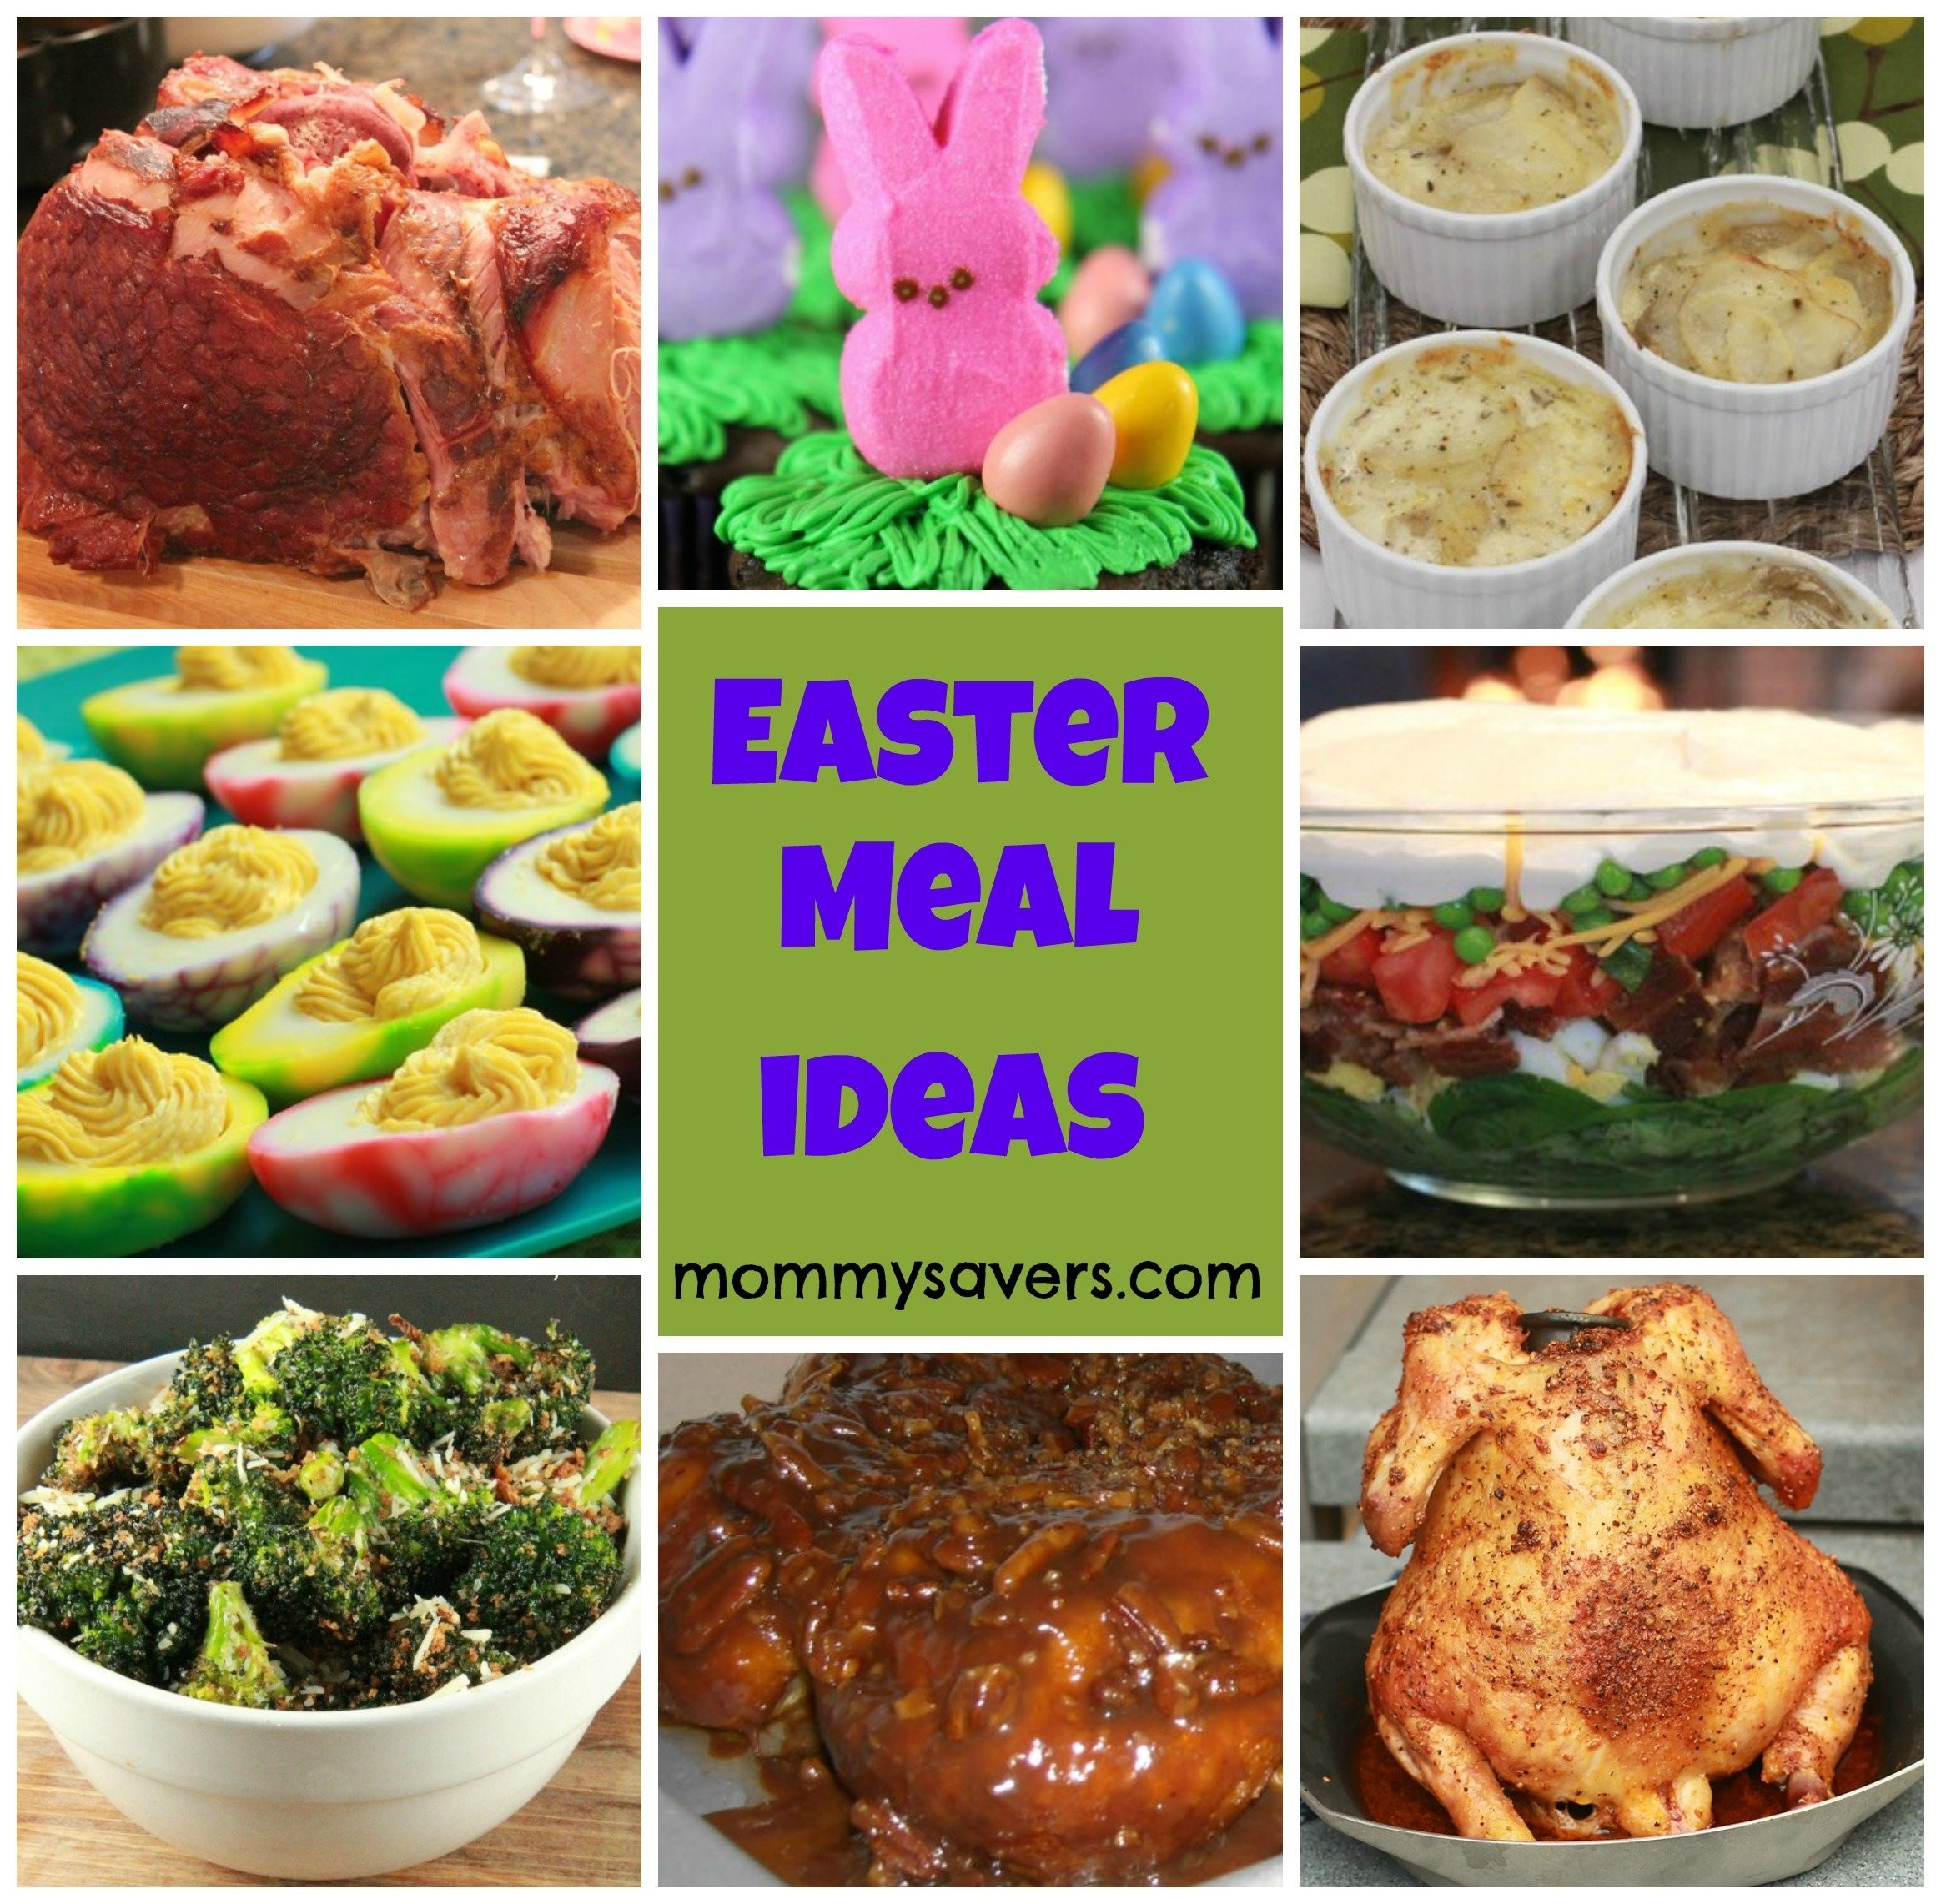 Easter Dinner Suggestions
 10 Fashionable Easter Sunday Dinner Menu Ideas 2021